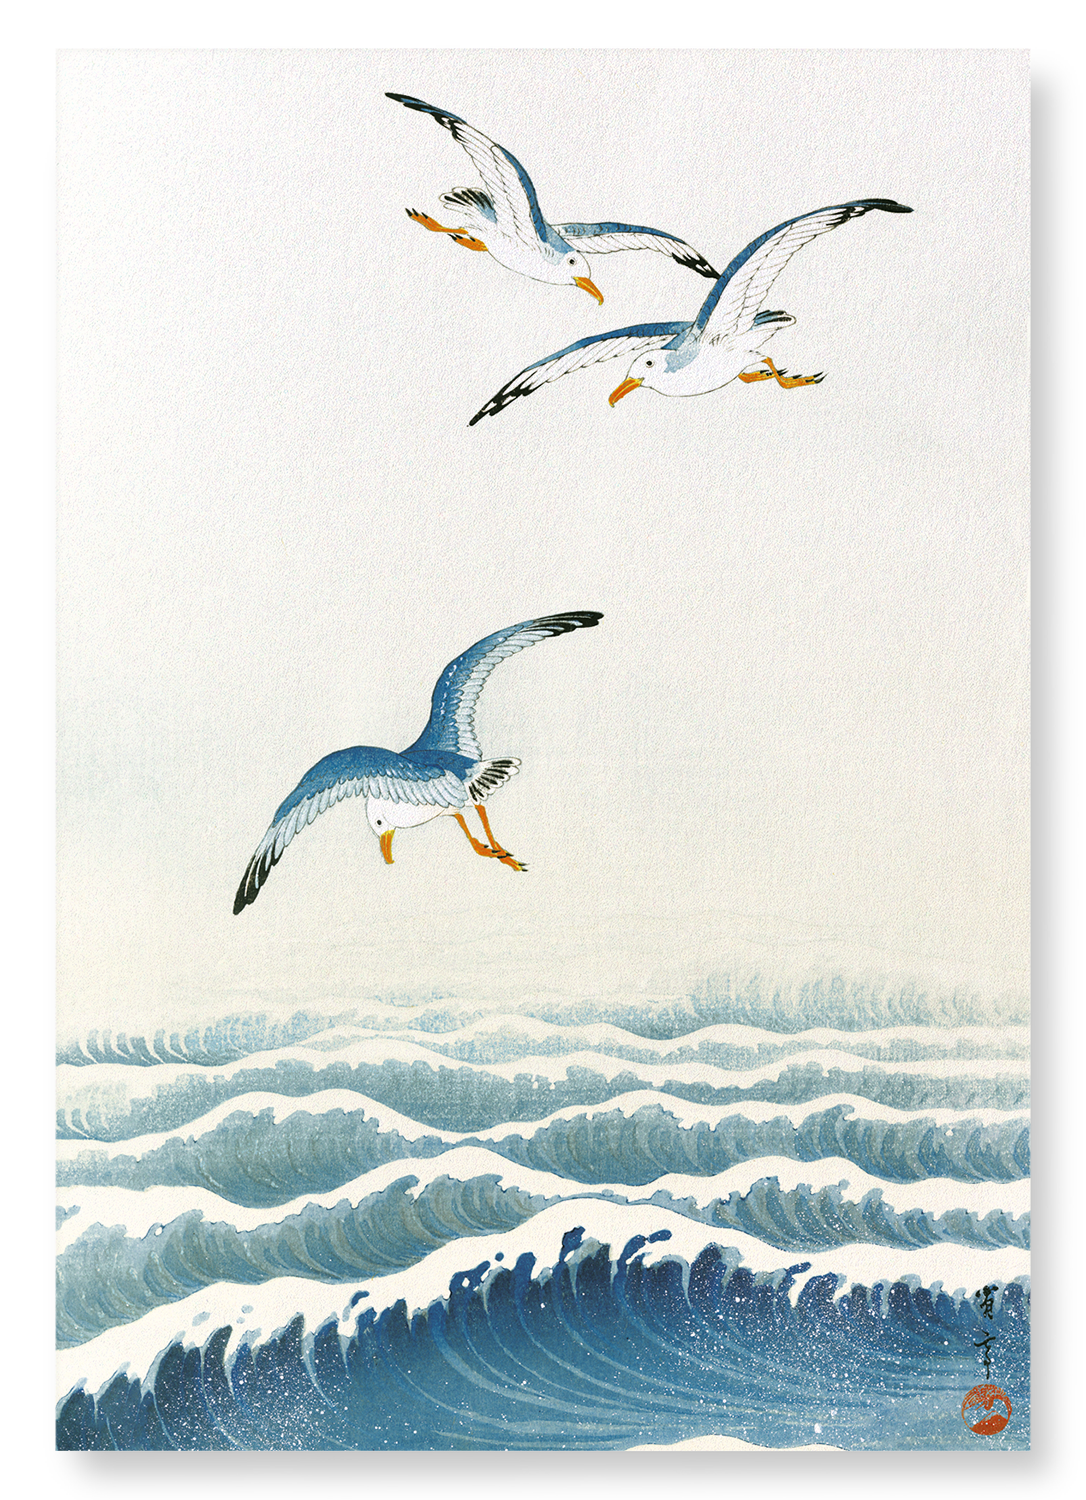 SEAGULLS OVER THE WAVES (C.1910)